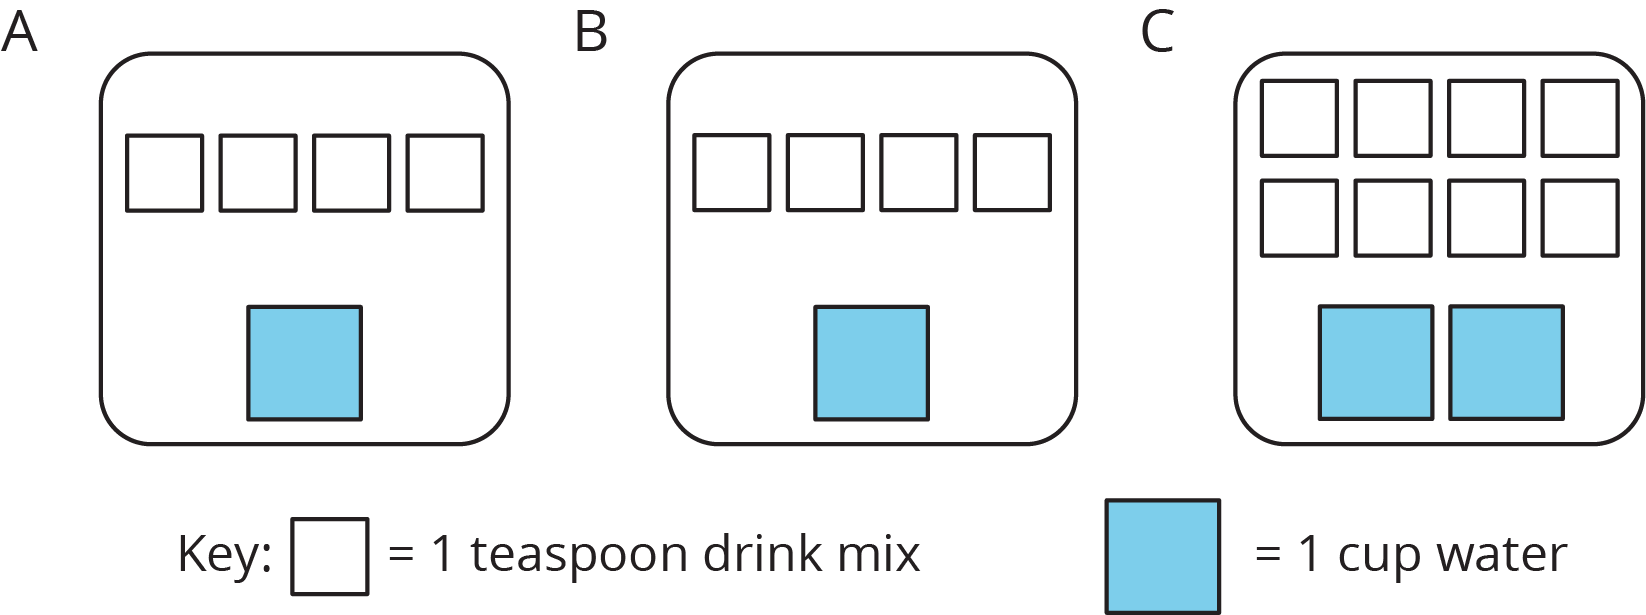 "A figure of three diagrams, labeled "A", "B", and "C", each contain white and blue squares. Diagram A has 4 white squares and 1 blue square. Diagram B has 4 white squares and 1 blue square. Diagram C has 8 white squares and 2 blue squares. There is a legend labeled "key" where 1 white square represents 1 teaspoon salt and 1 blue square represents 1 cup water." 